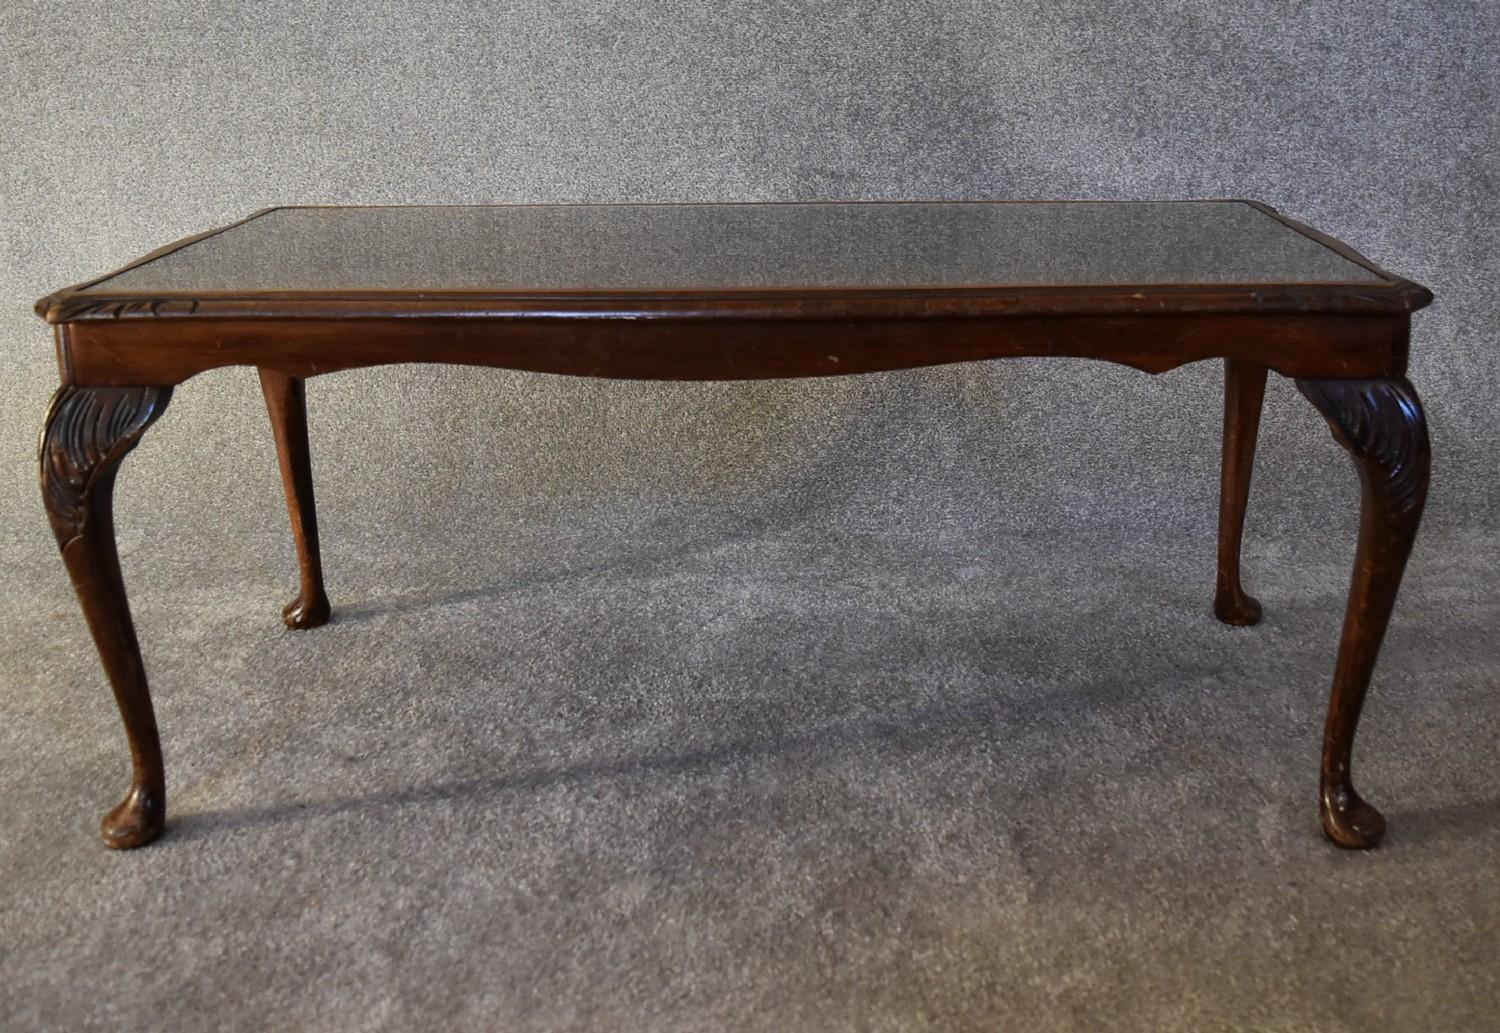 A mahogany Georgian style coffee table with a glass top. H.40 x 97cm